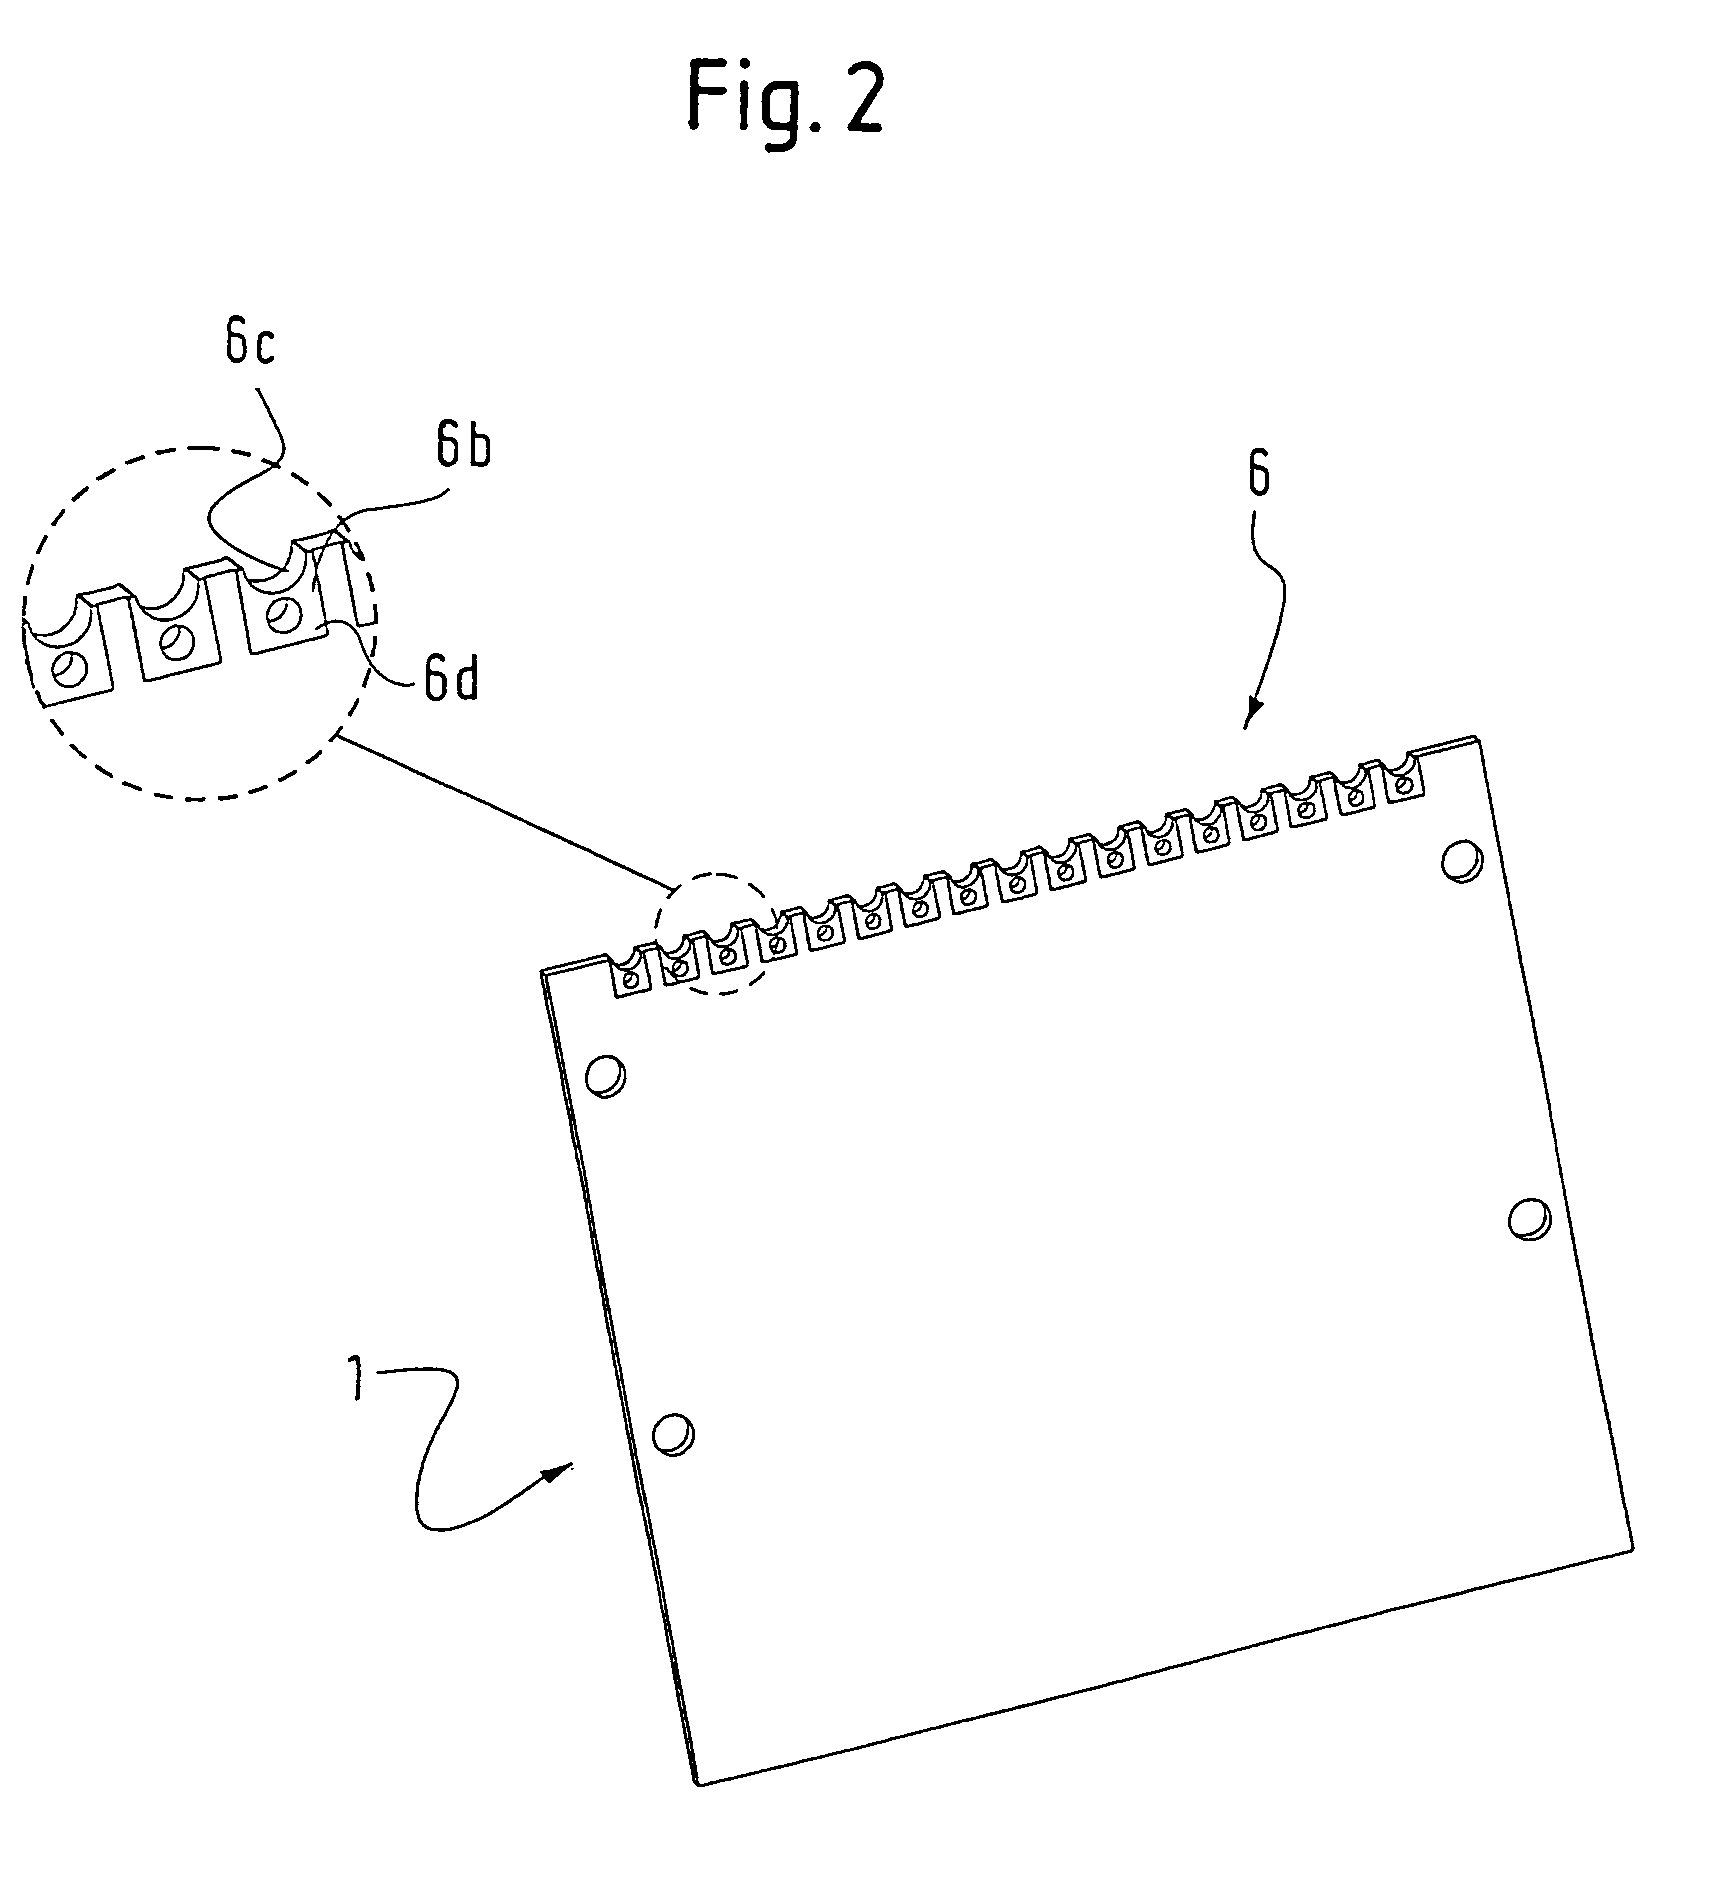 Electrical contacting method